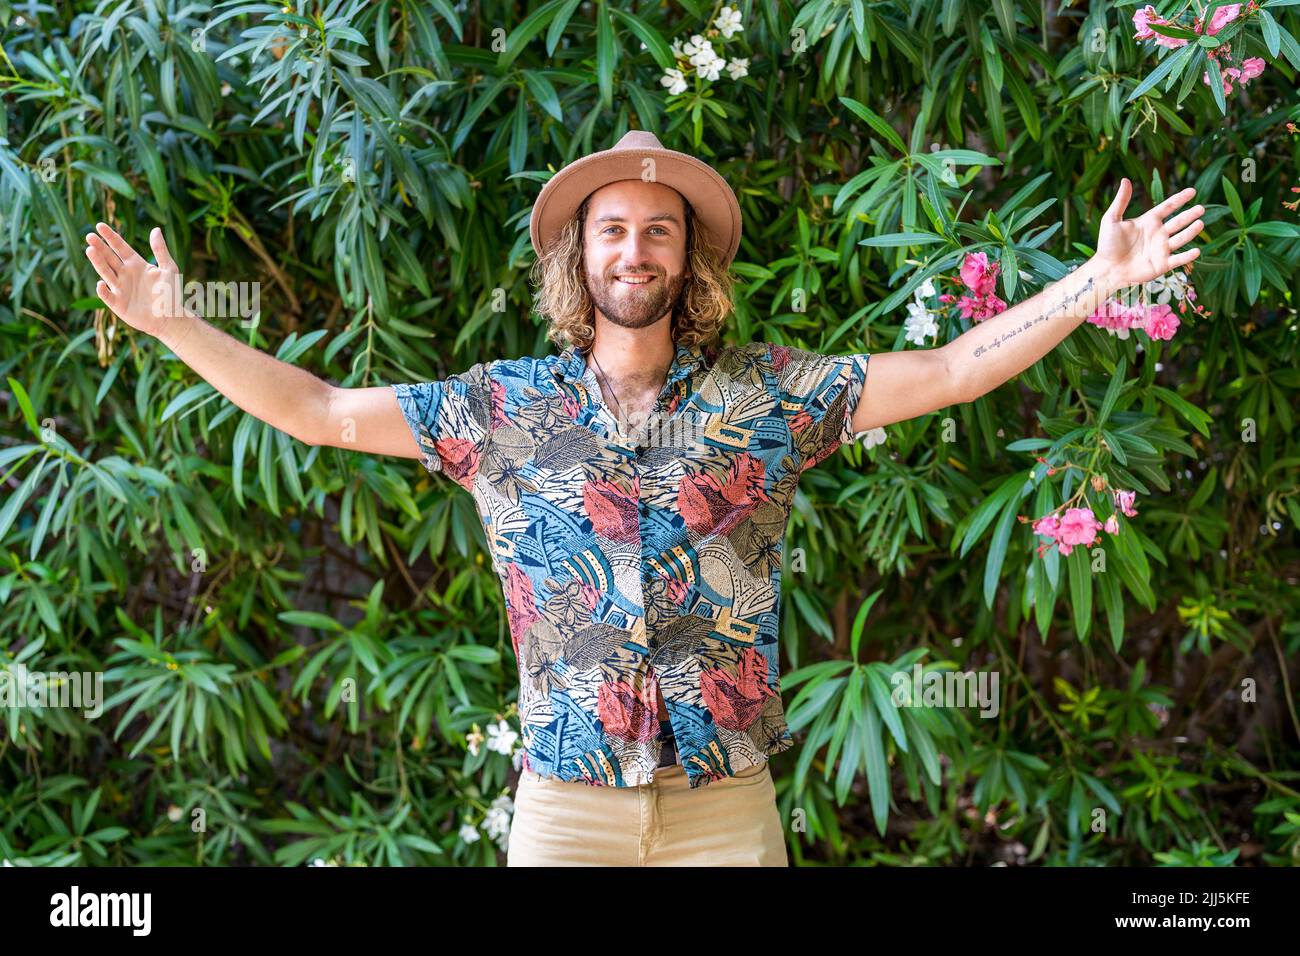 Smiling man standing with arms outstretched in front of plant Stock Photo